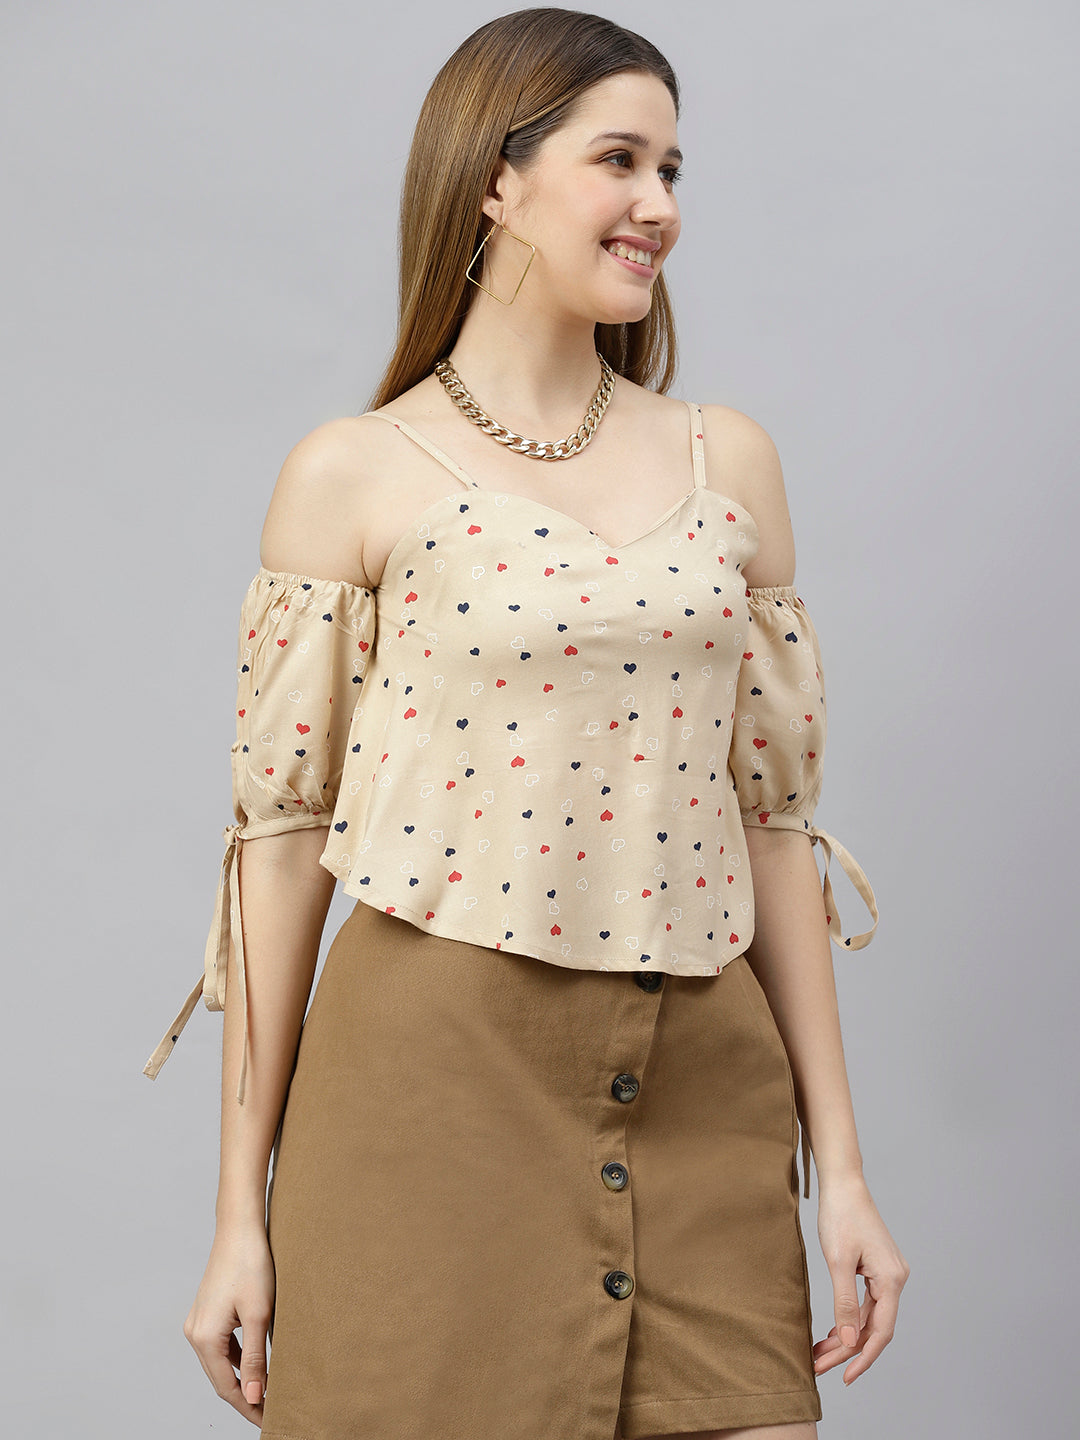 Cold Sleeves Top